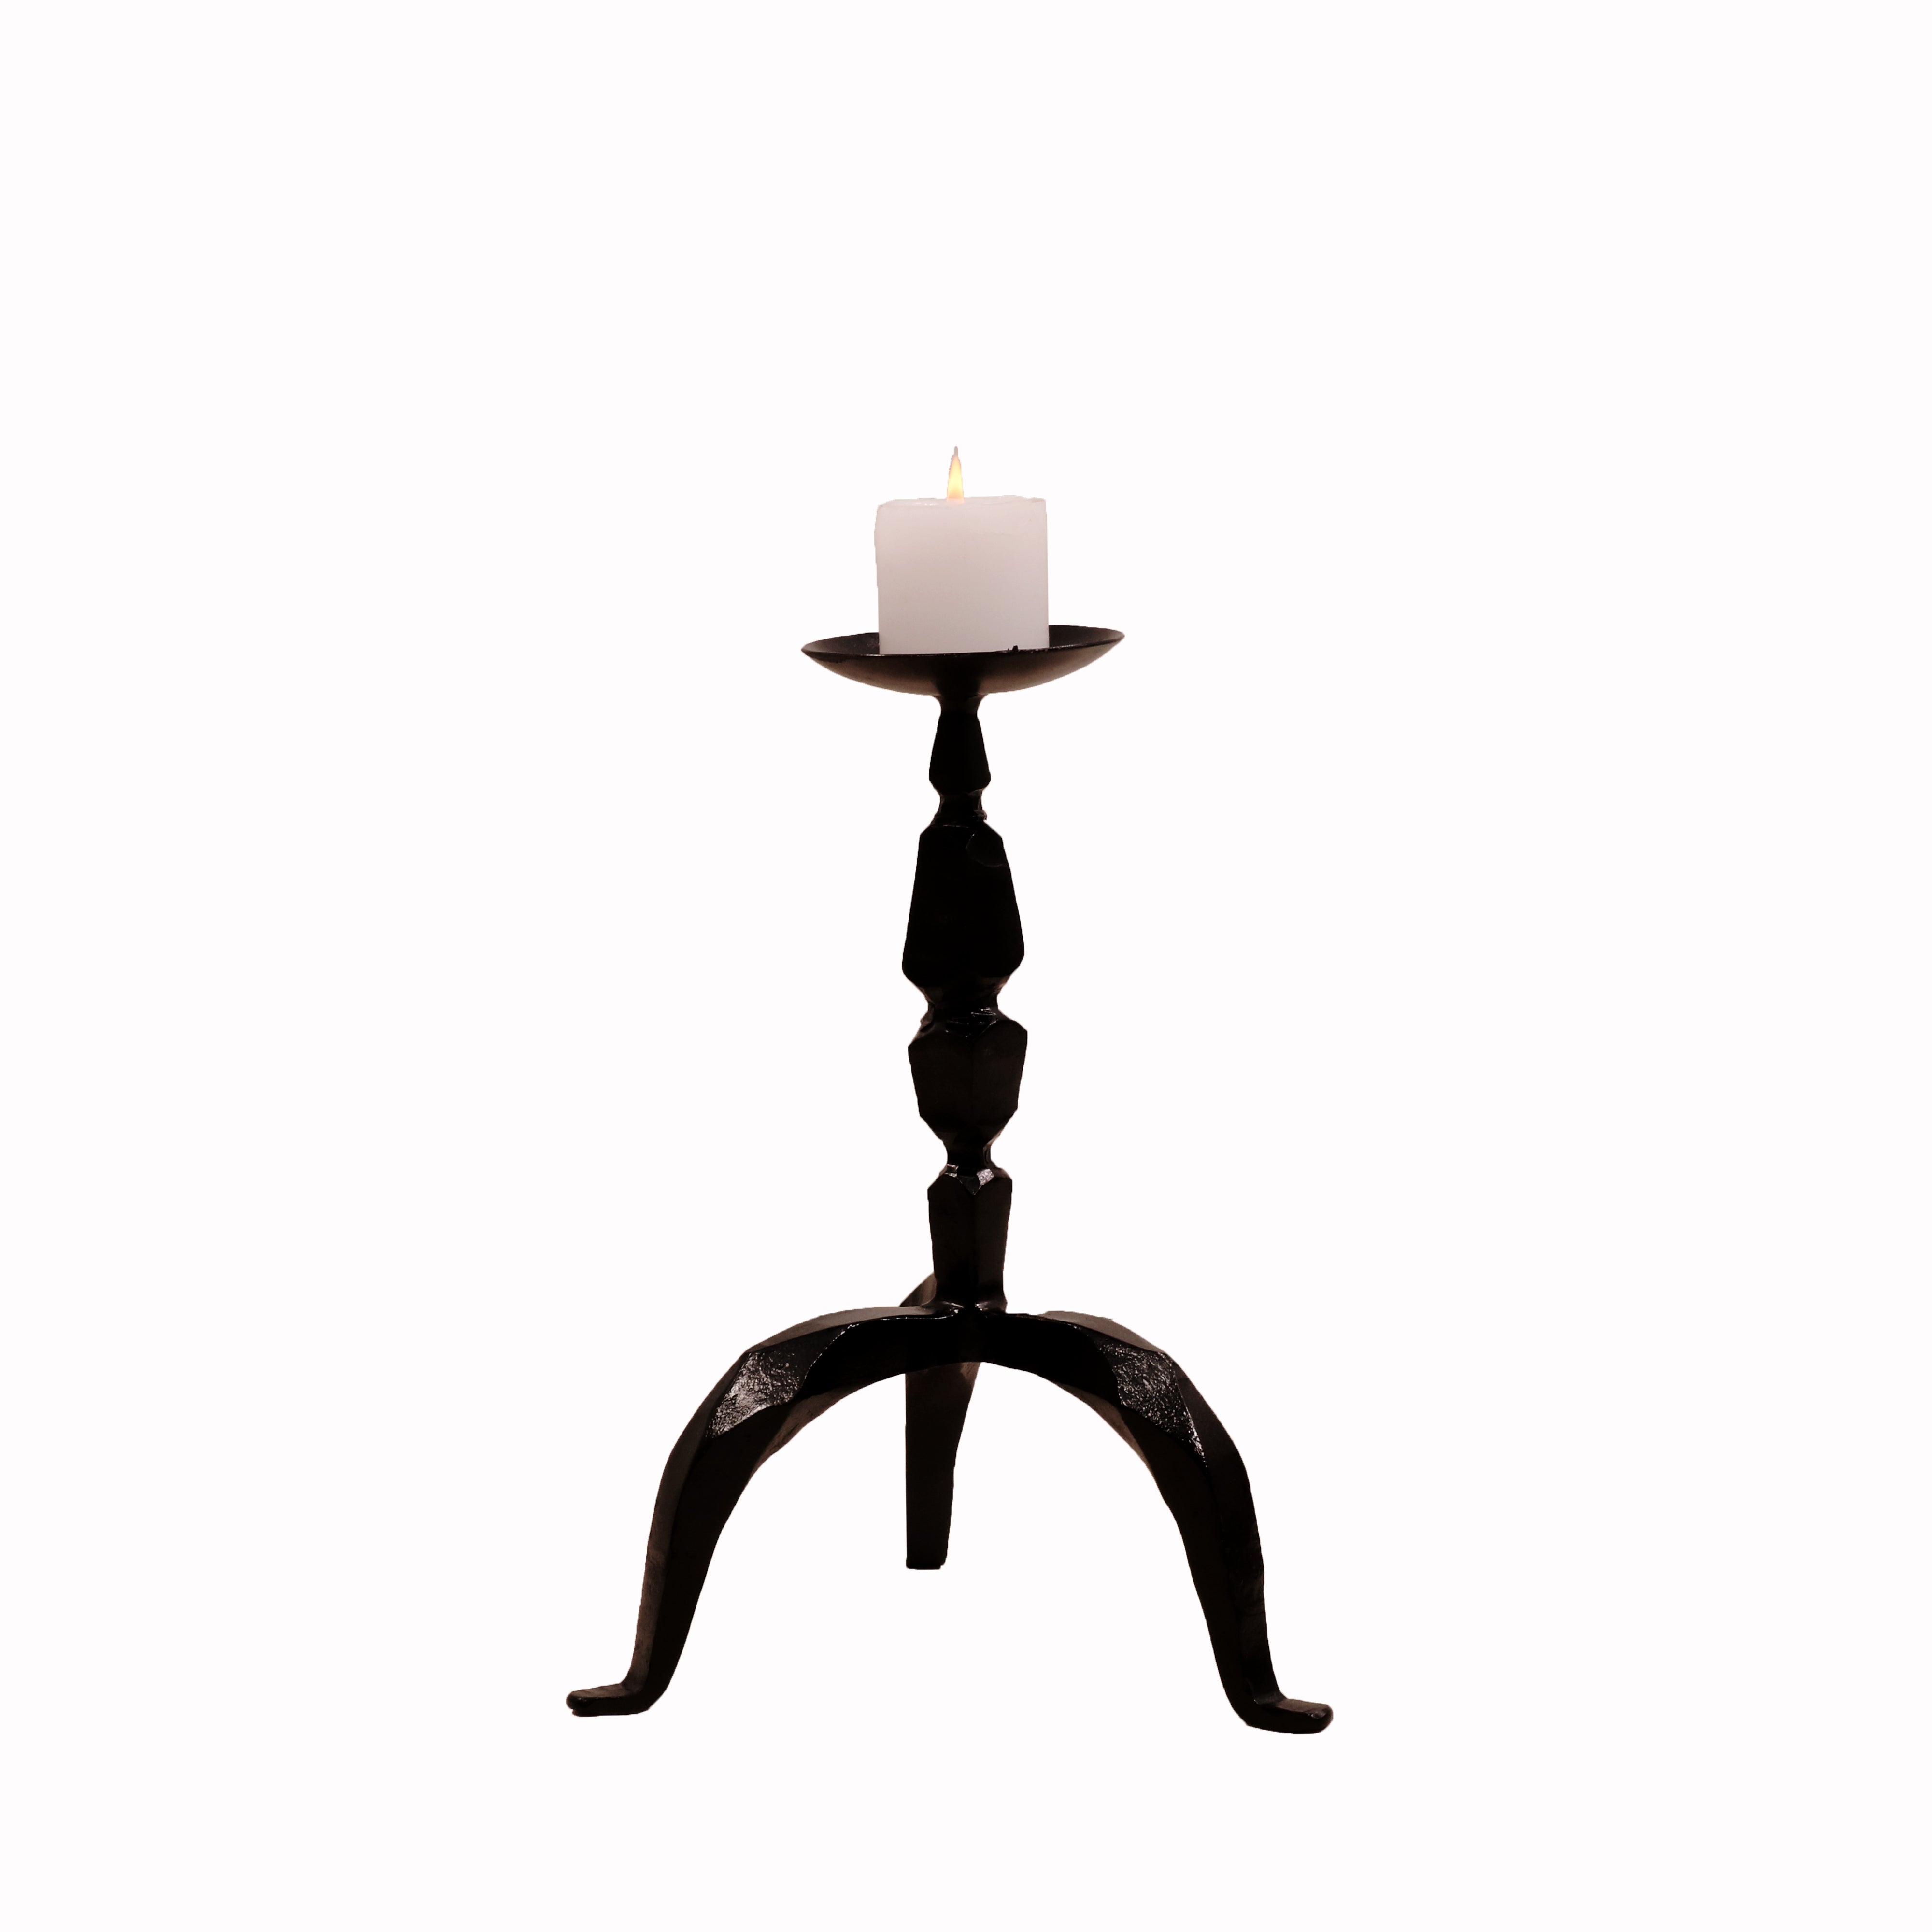 Carved Three Legged Candle Holder Candle Holder